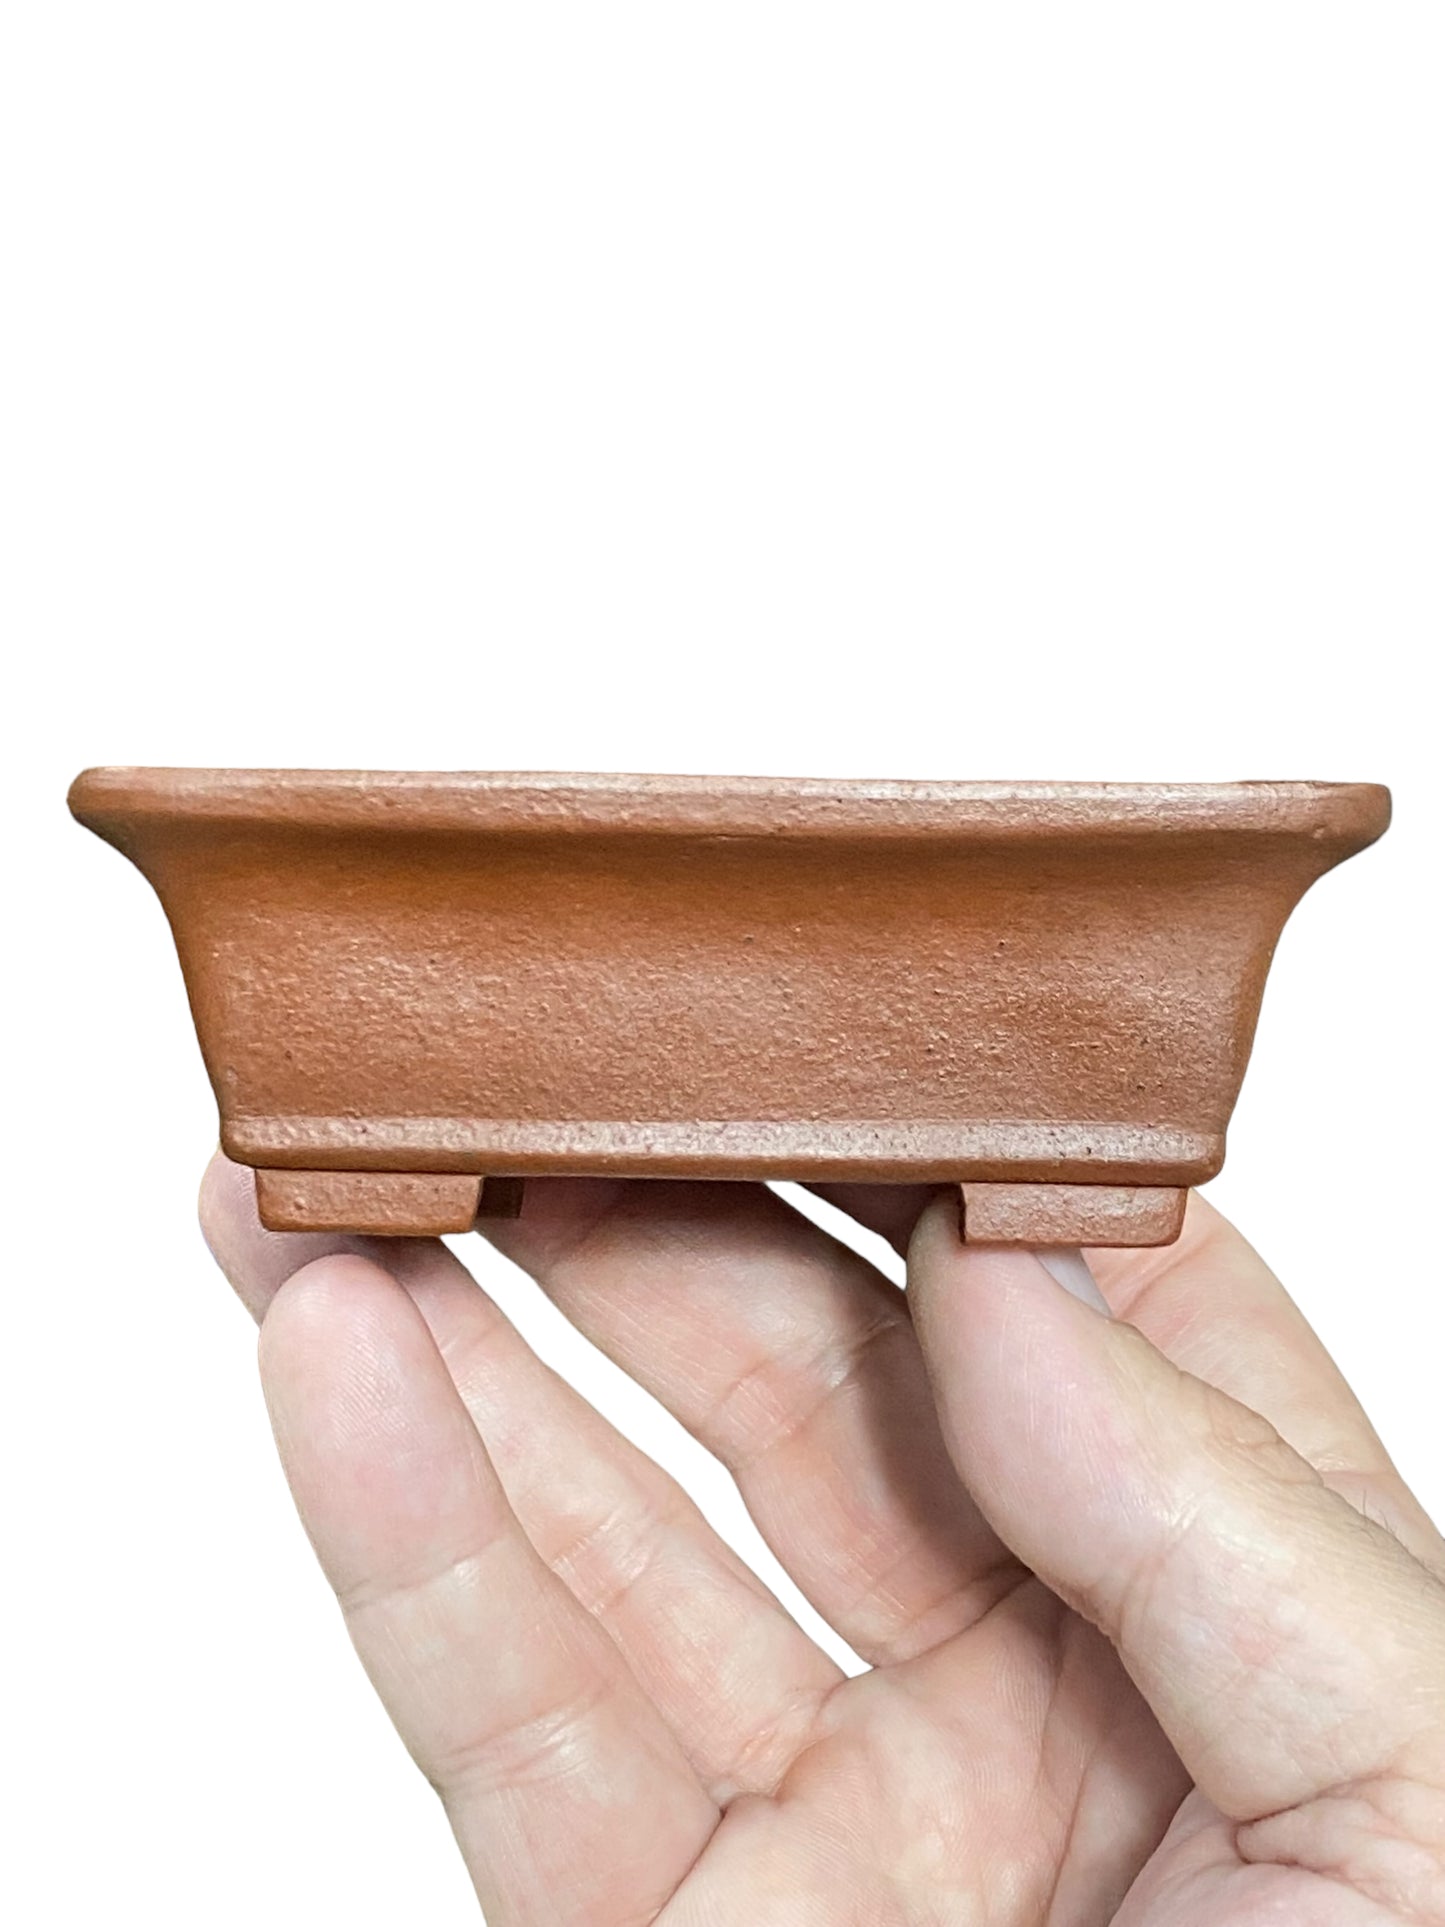 Maruhei - Relief Carved Footed Rectangle Style Bonsai Pot